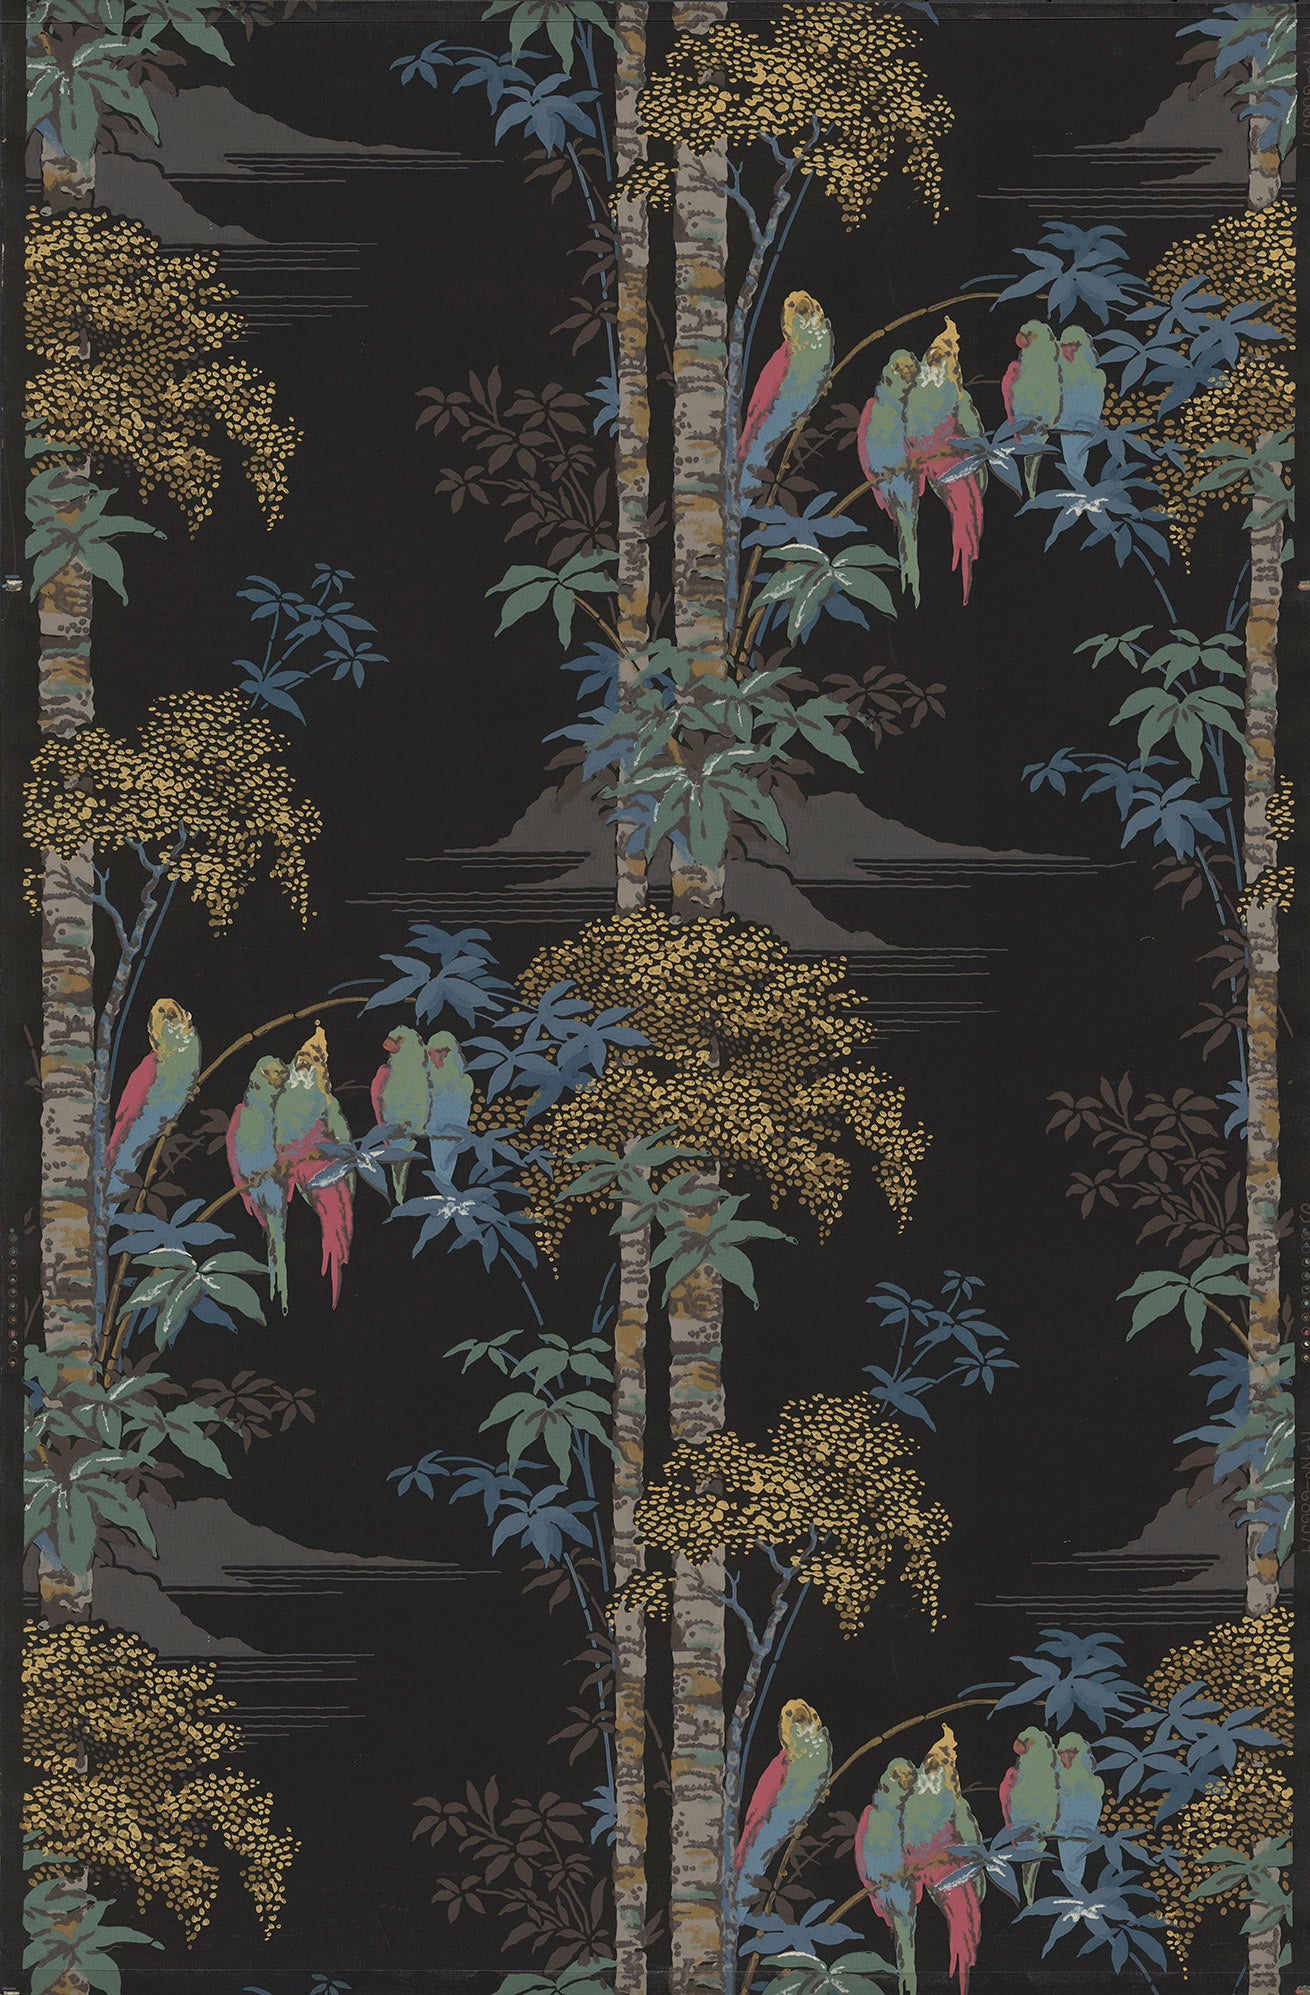 Parakeets in Palm Trees - Antique Wallpaper Remnant